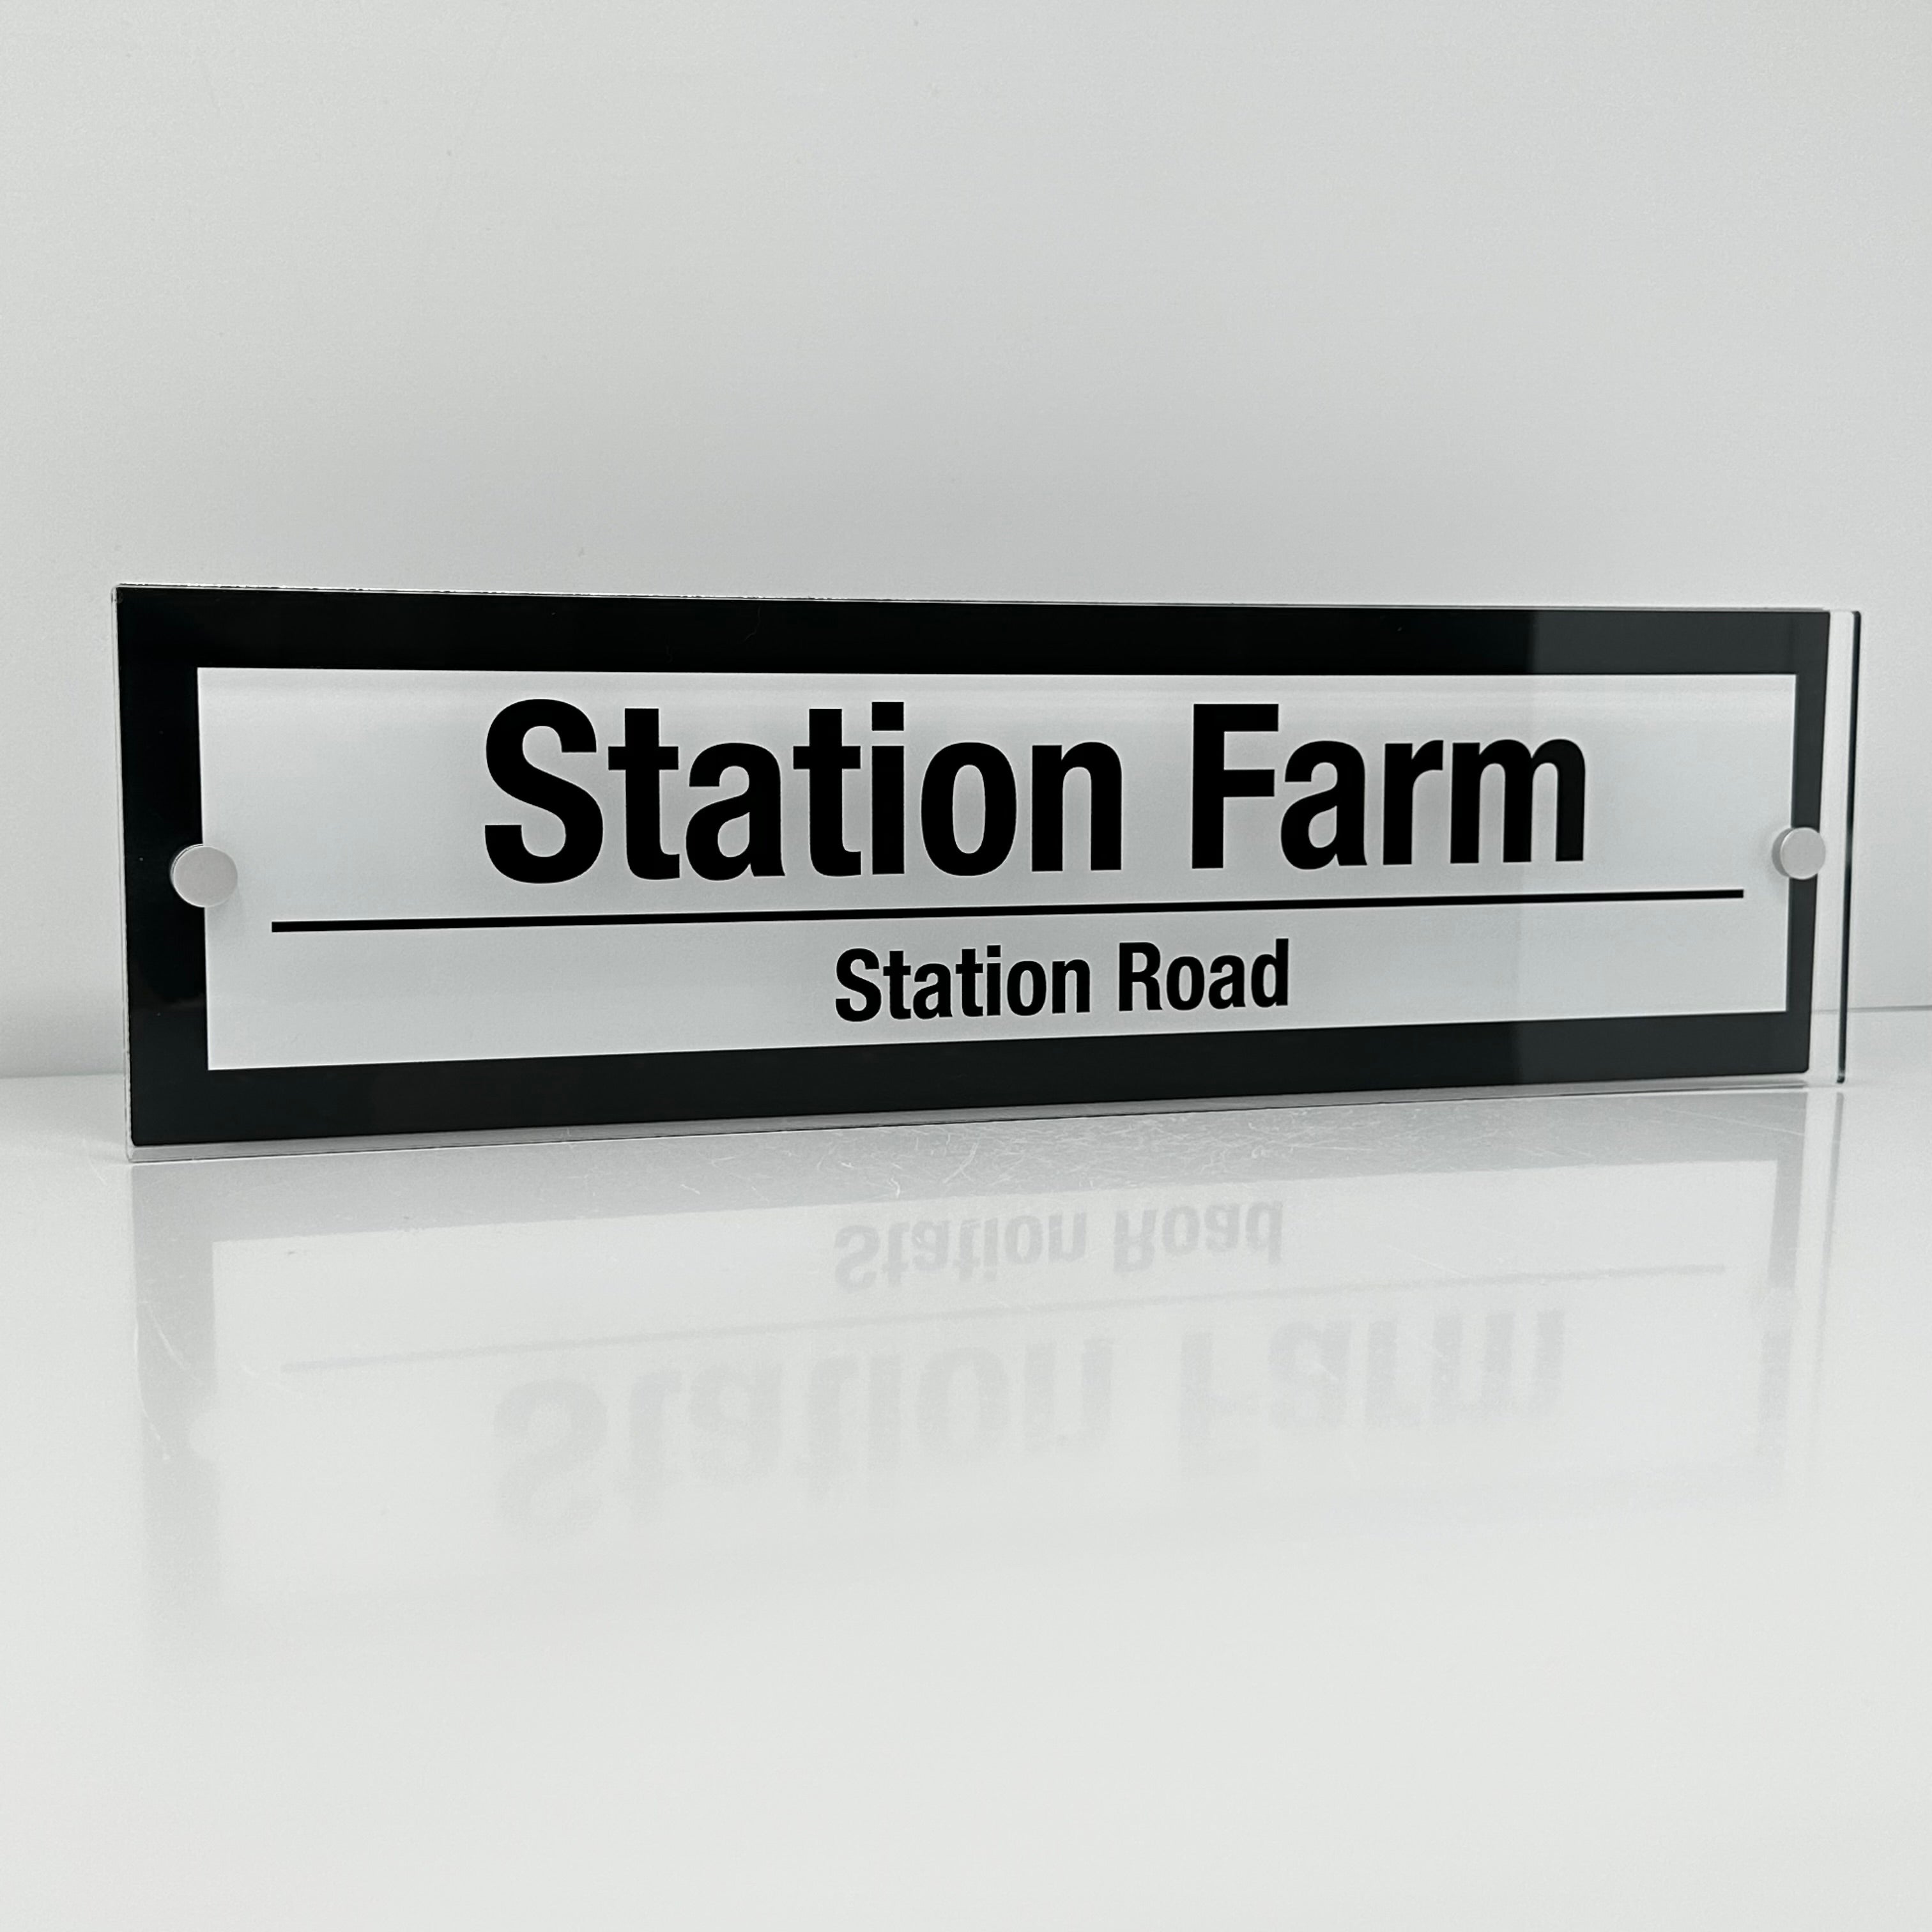 The Station Farm Modern House Sign with Perspex Acrylic Front, Anthracite Grey Rear Panel and Satin Silver Stand Off Fixings ( Size - 42cm x 12cm - WHITE BACKGROUND BLACK TEXT )